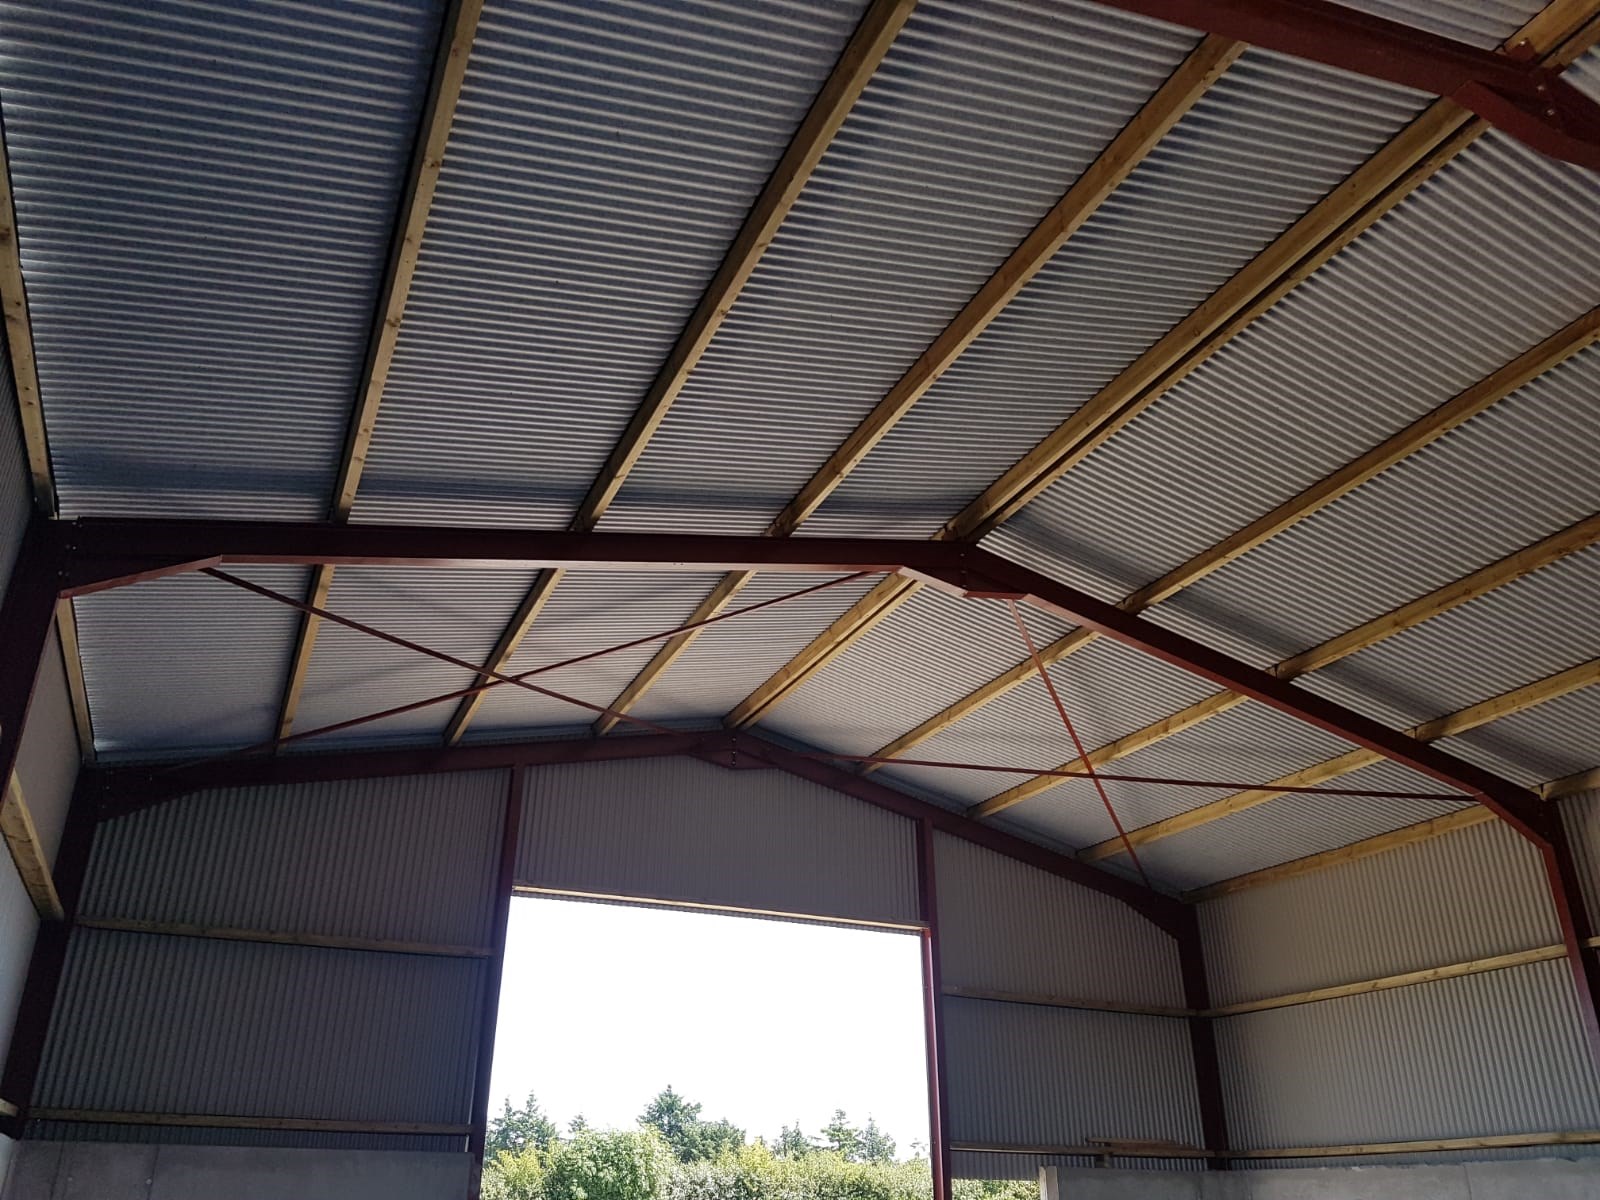 Dripstop - Agricultural Sheeting Solutions, Cladding Solutions from EQC Ireland